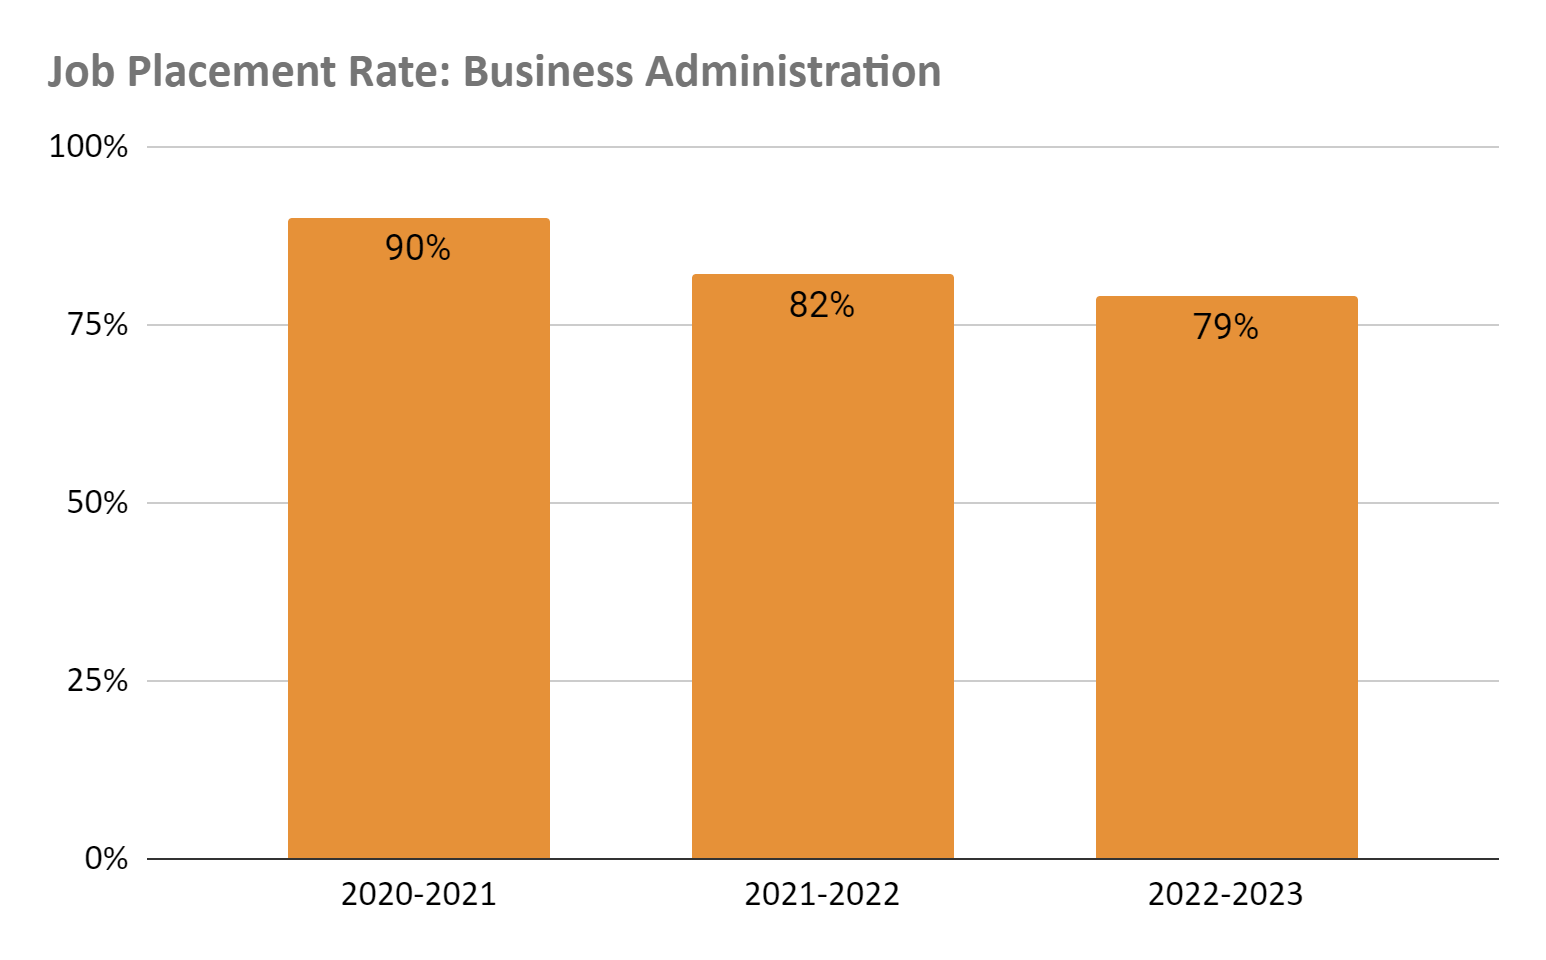 Job Placement Rate - Business Administration